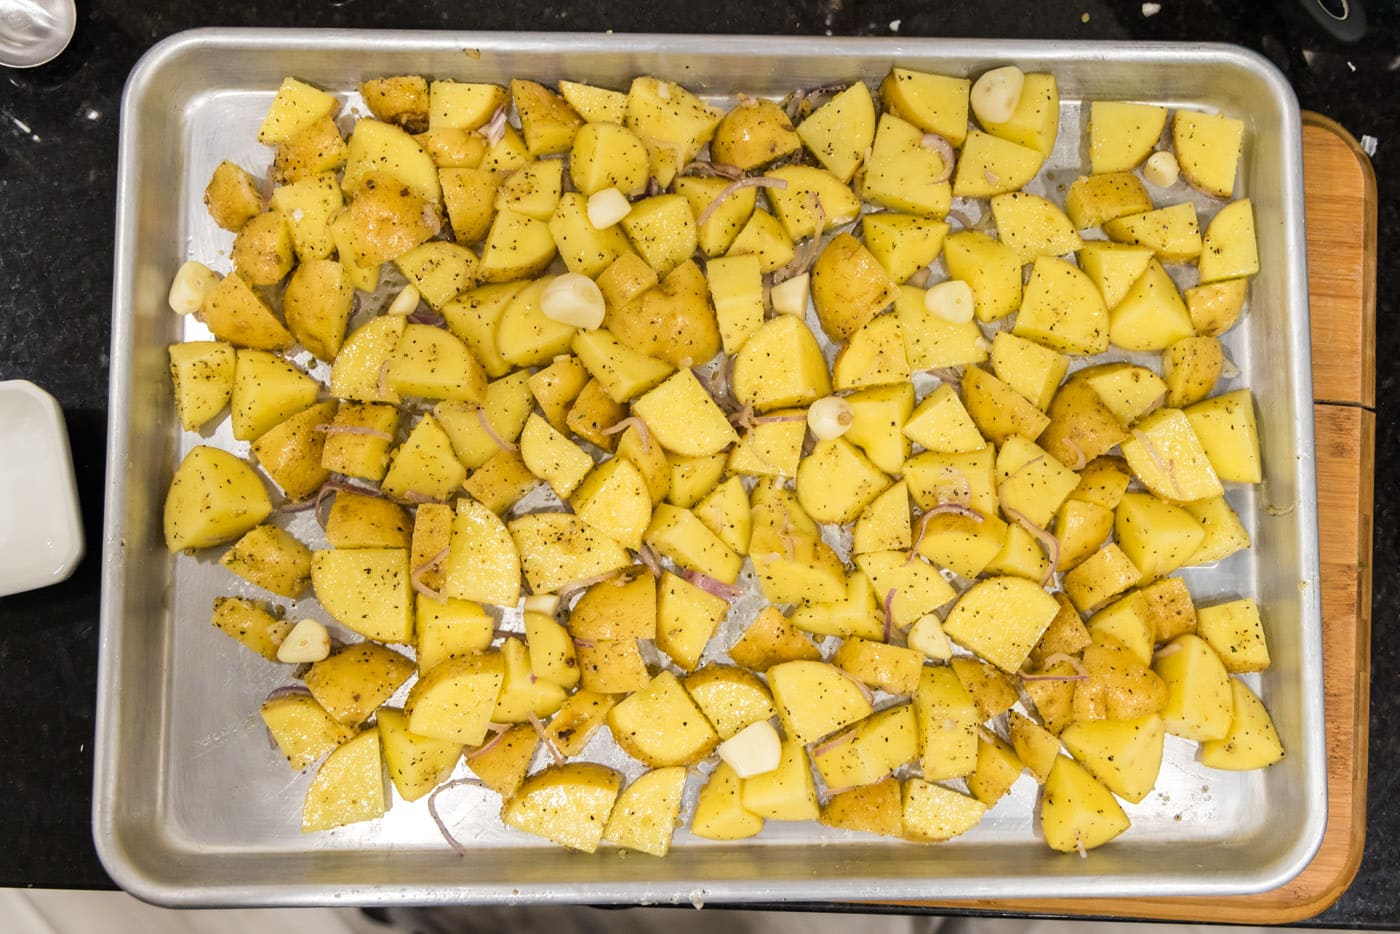 cubed potatoes on a baking sheet with garlic cloves on top